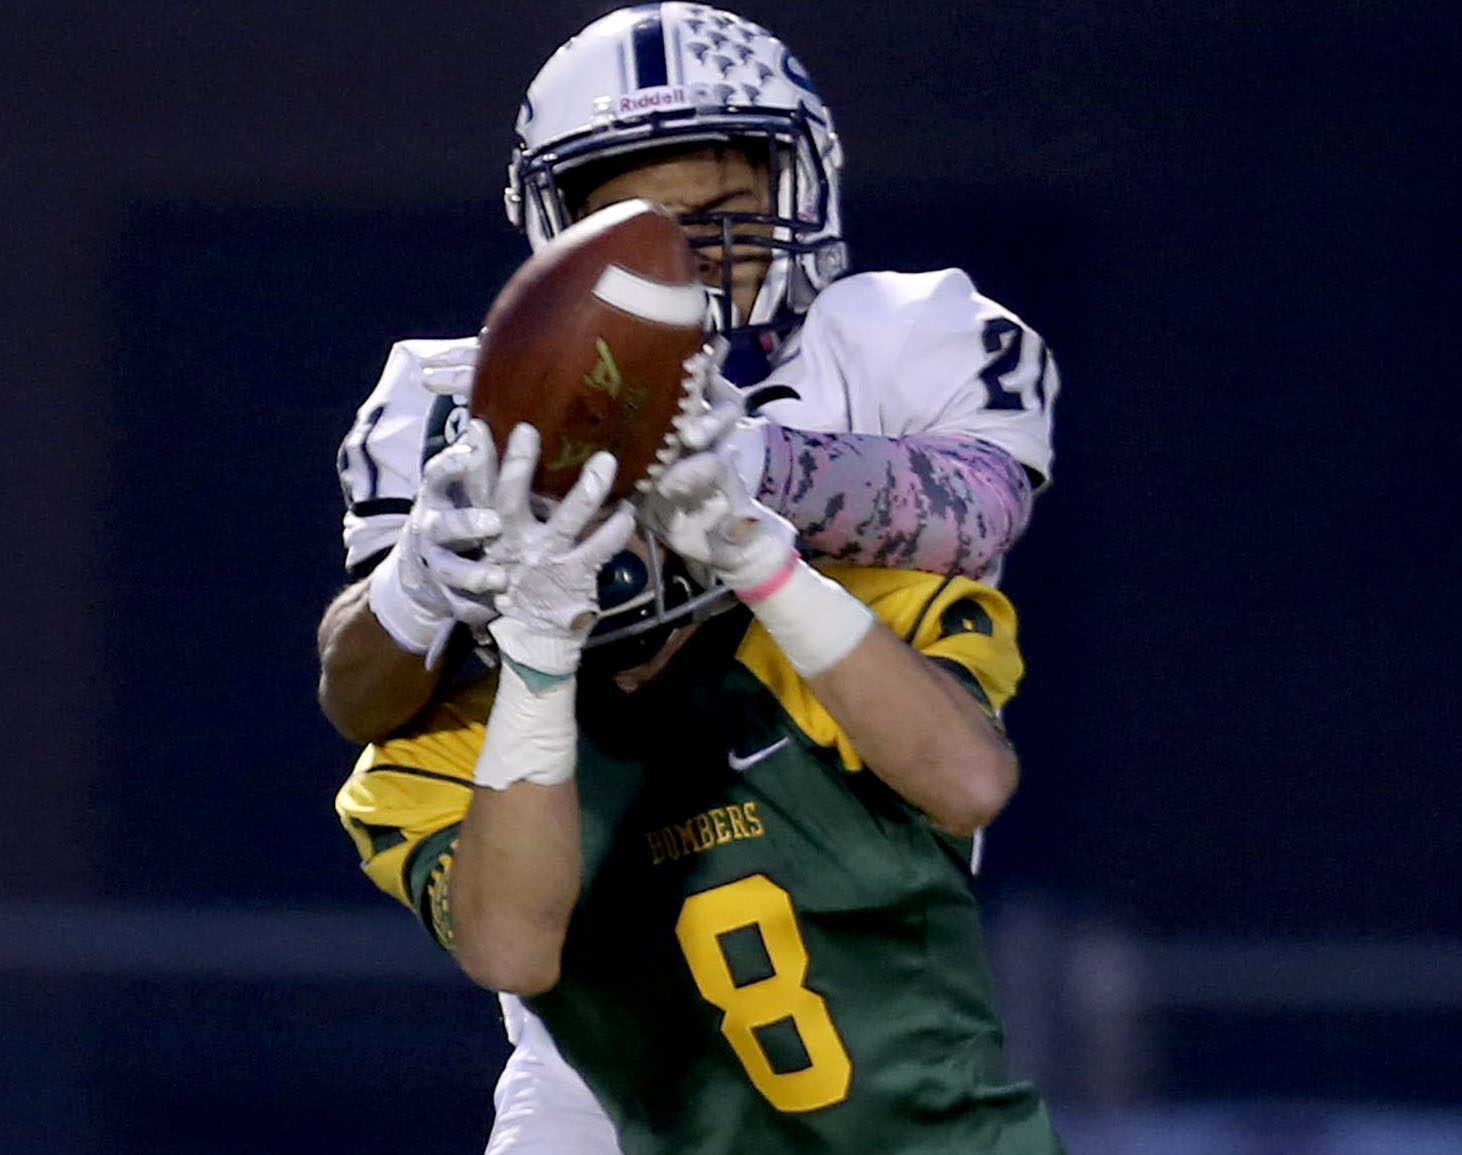 Richland High School's Alex Chapman (8) intercepts a pass to Skyview High School's Jeremiah Wright (21) Saturday during a 4A semifinal game at Neil F. Lampson Stadium in Kenenwick.